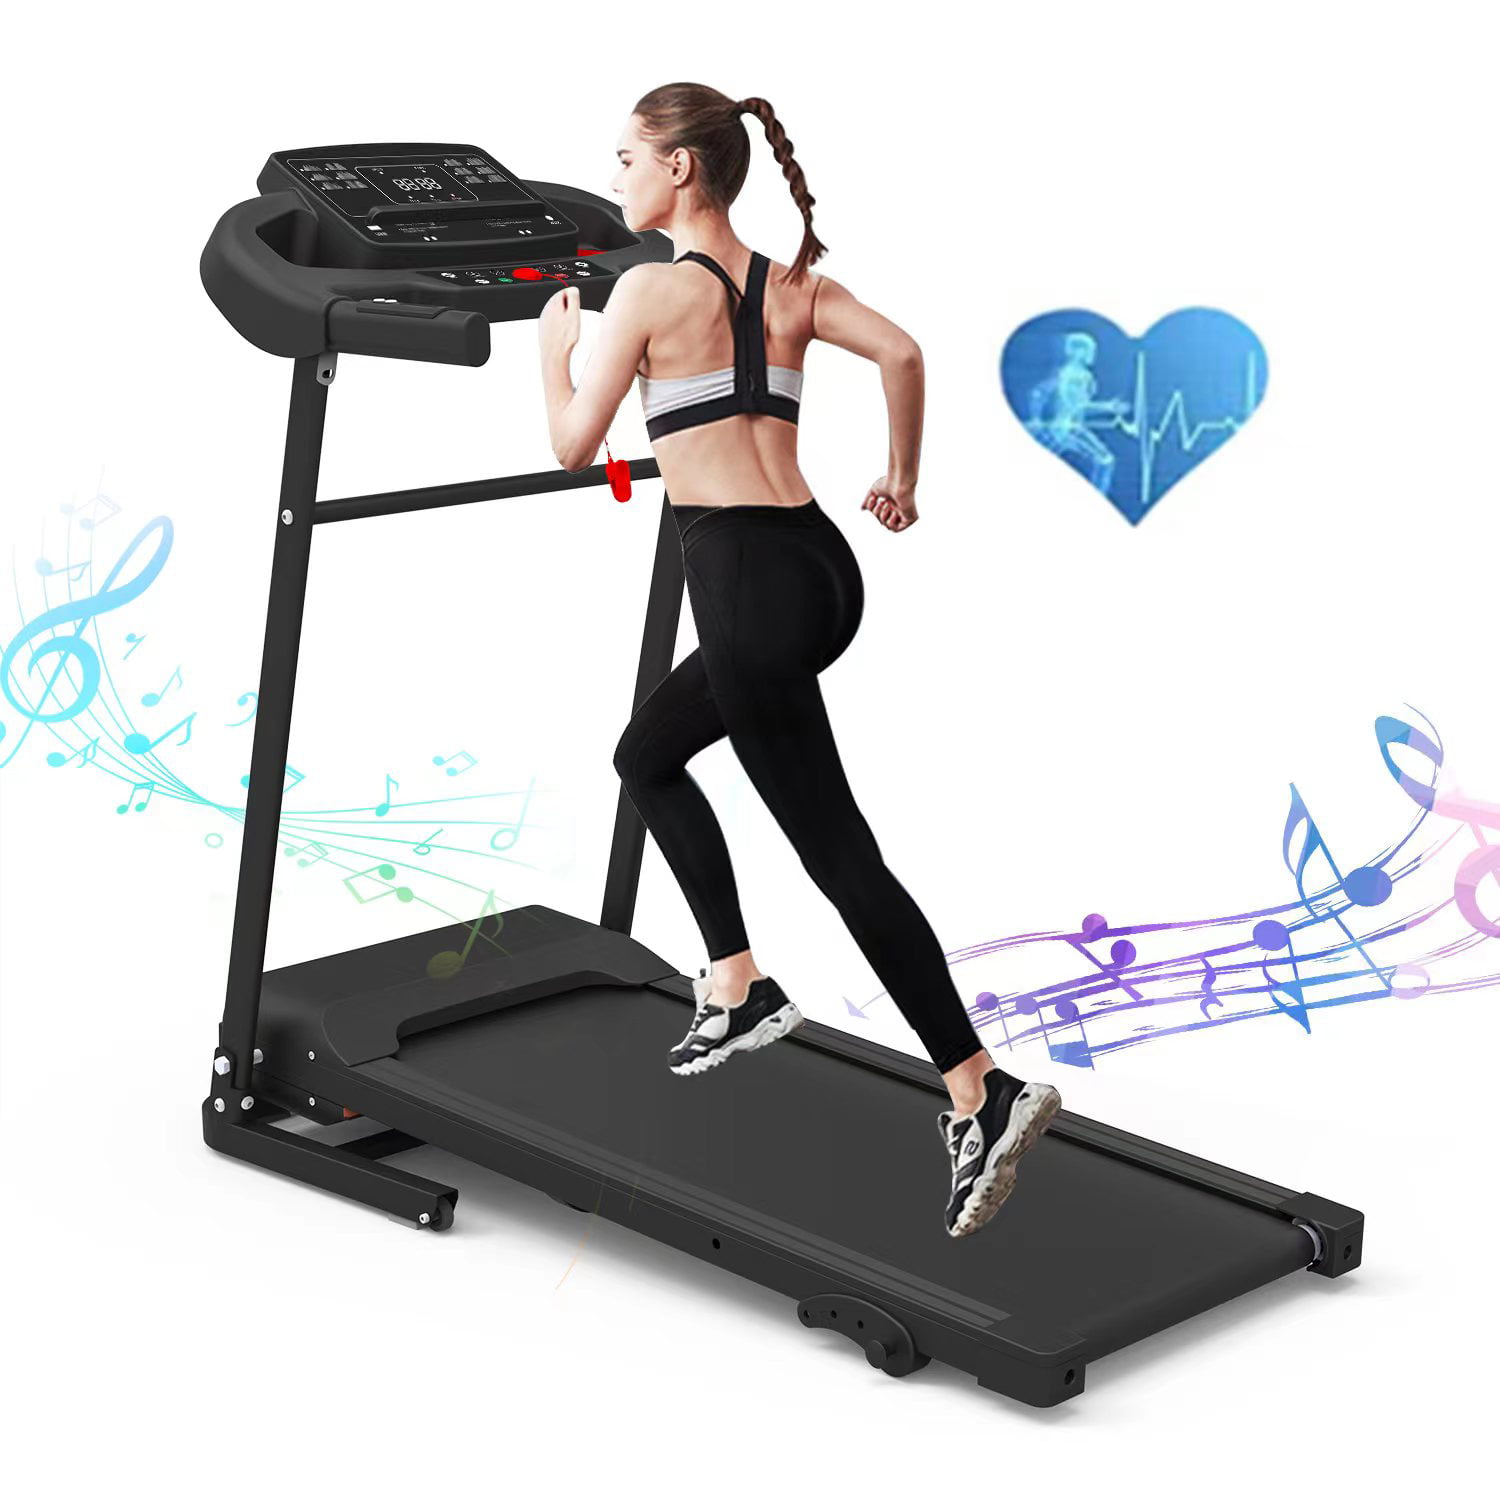 2 Day Deliver) 2022 Newest Folding Treadmills for Home with Bluetooth and Incline, 2.5HP Portable Running Machine Electric Compact Treadmills Foldable for Exercise Home Gym Fitness Walking Jogging